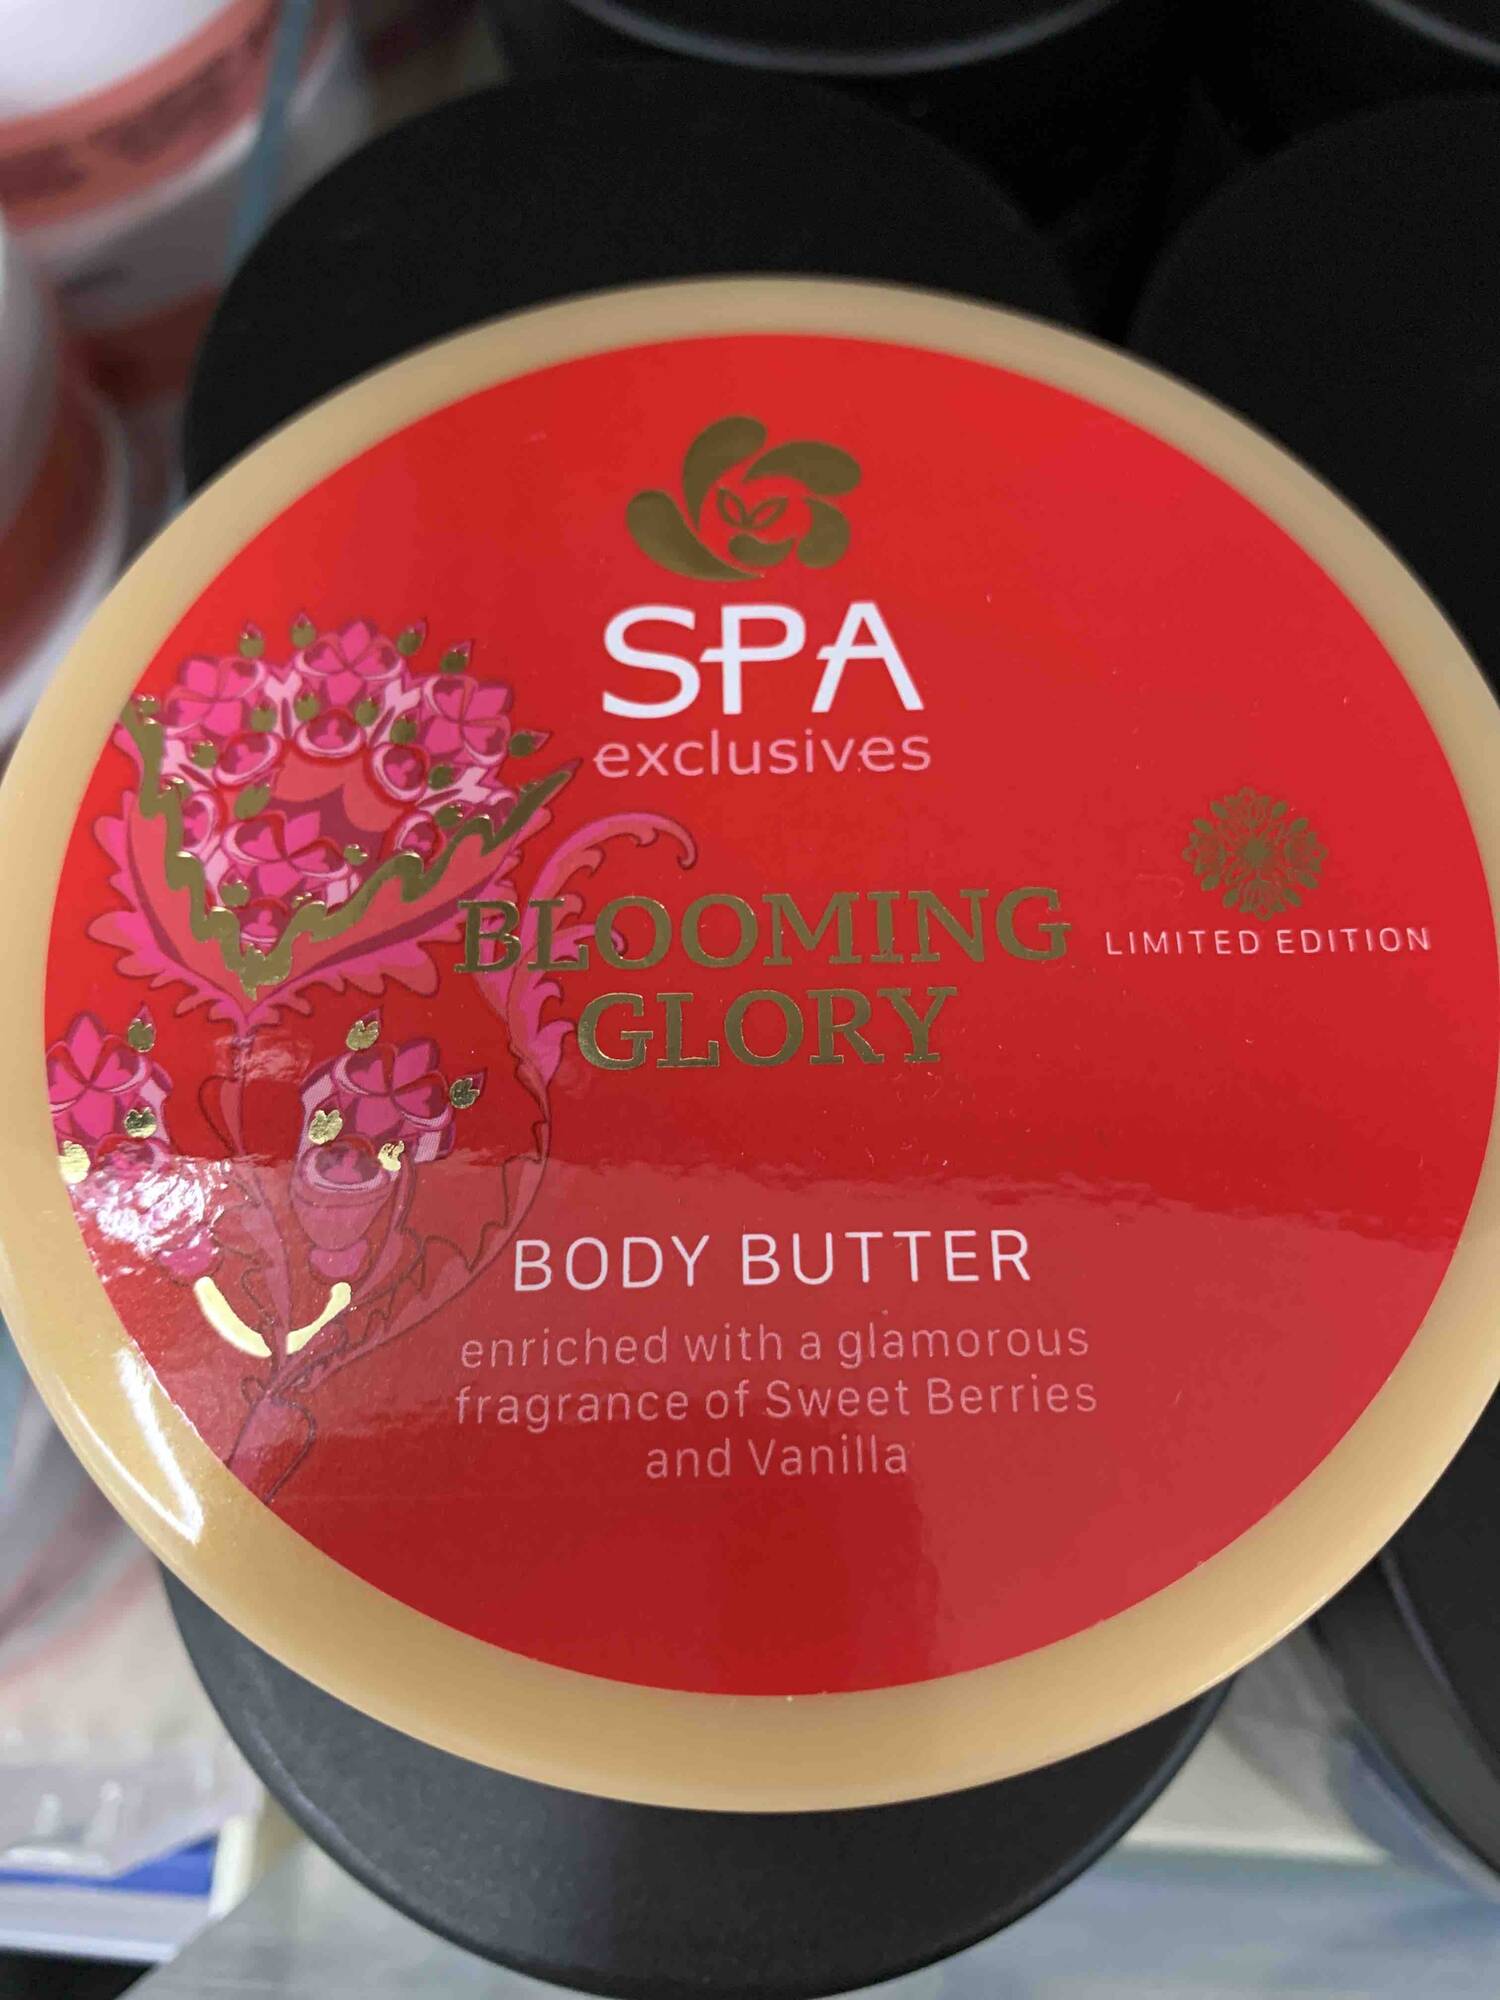 SPA EXCLUSIVES - Blooming glory - Body butter